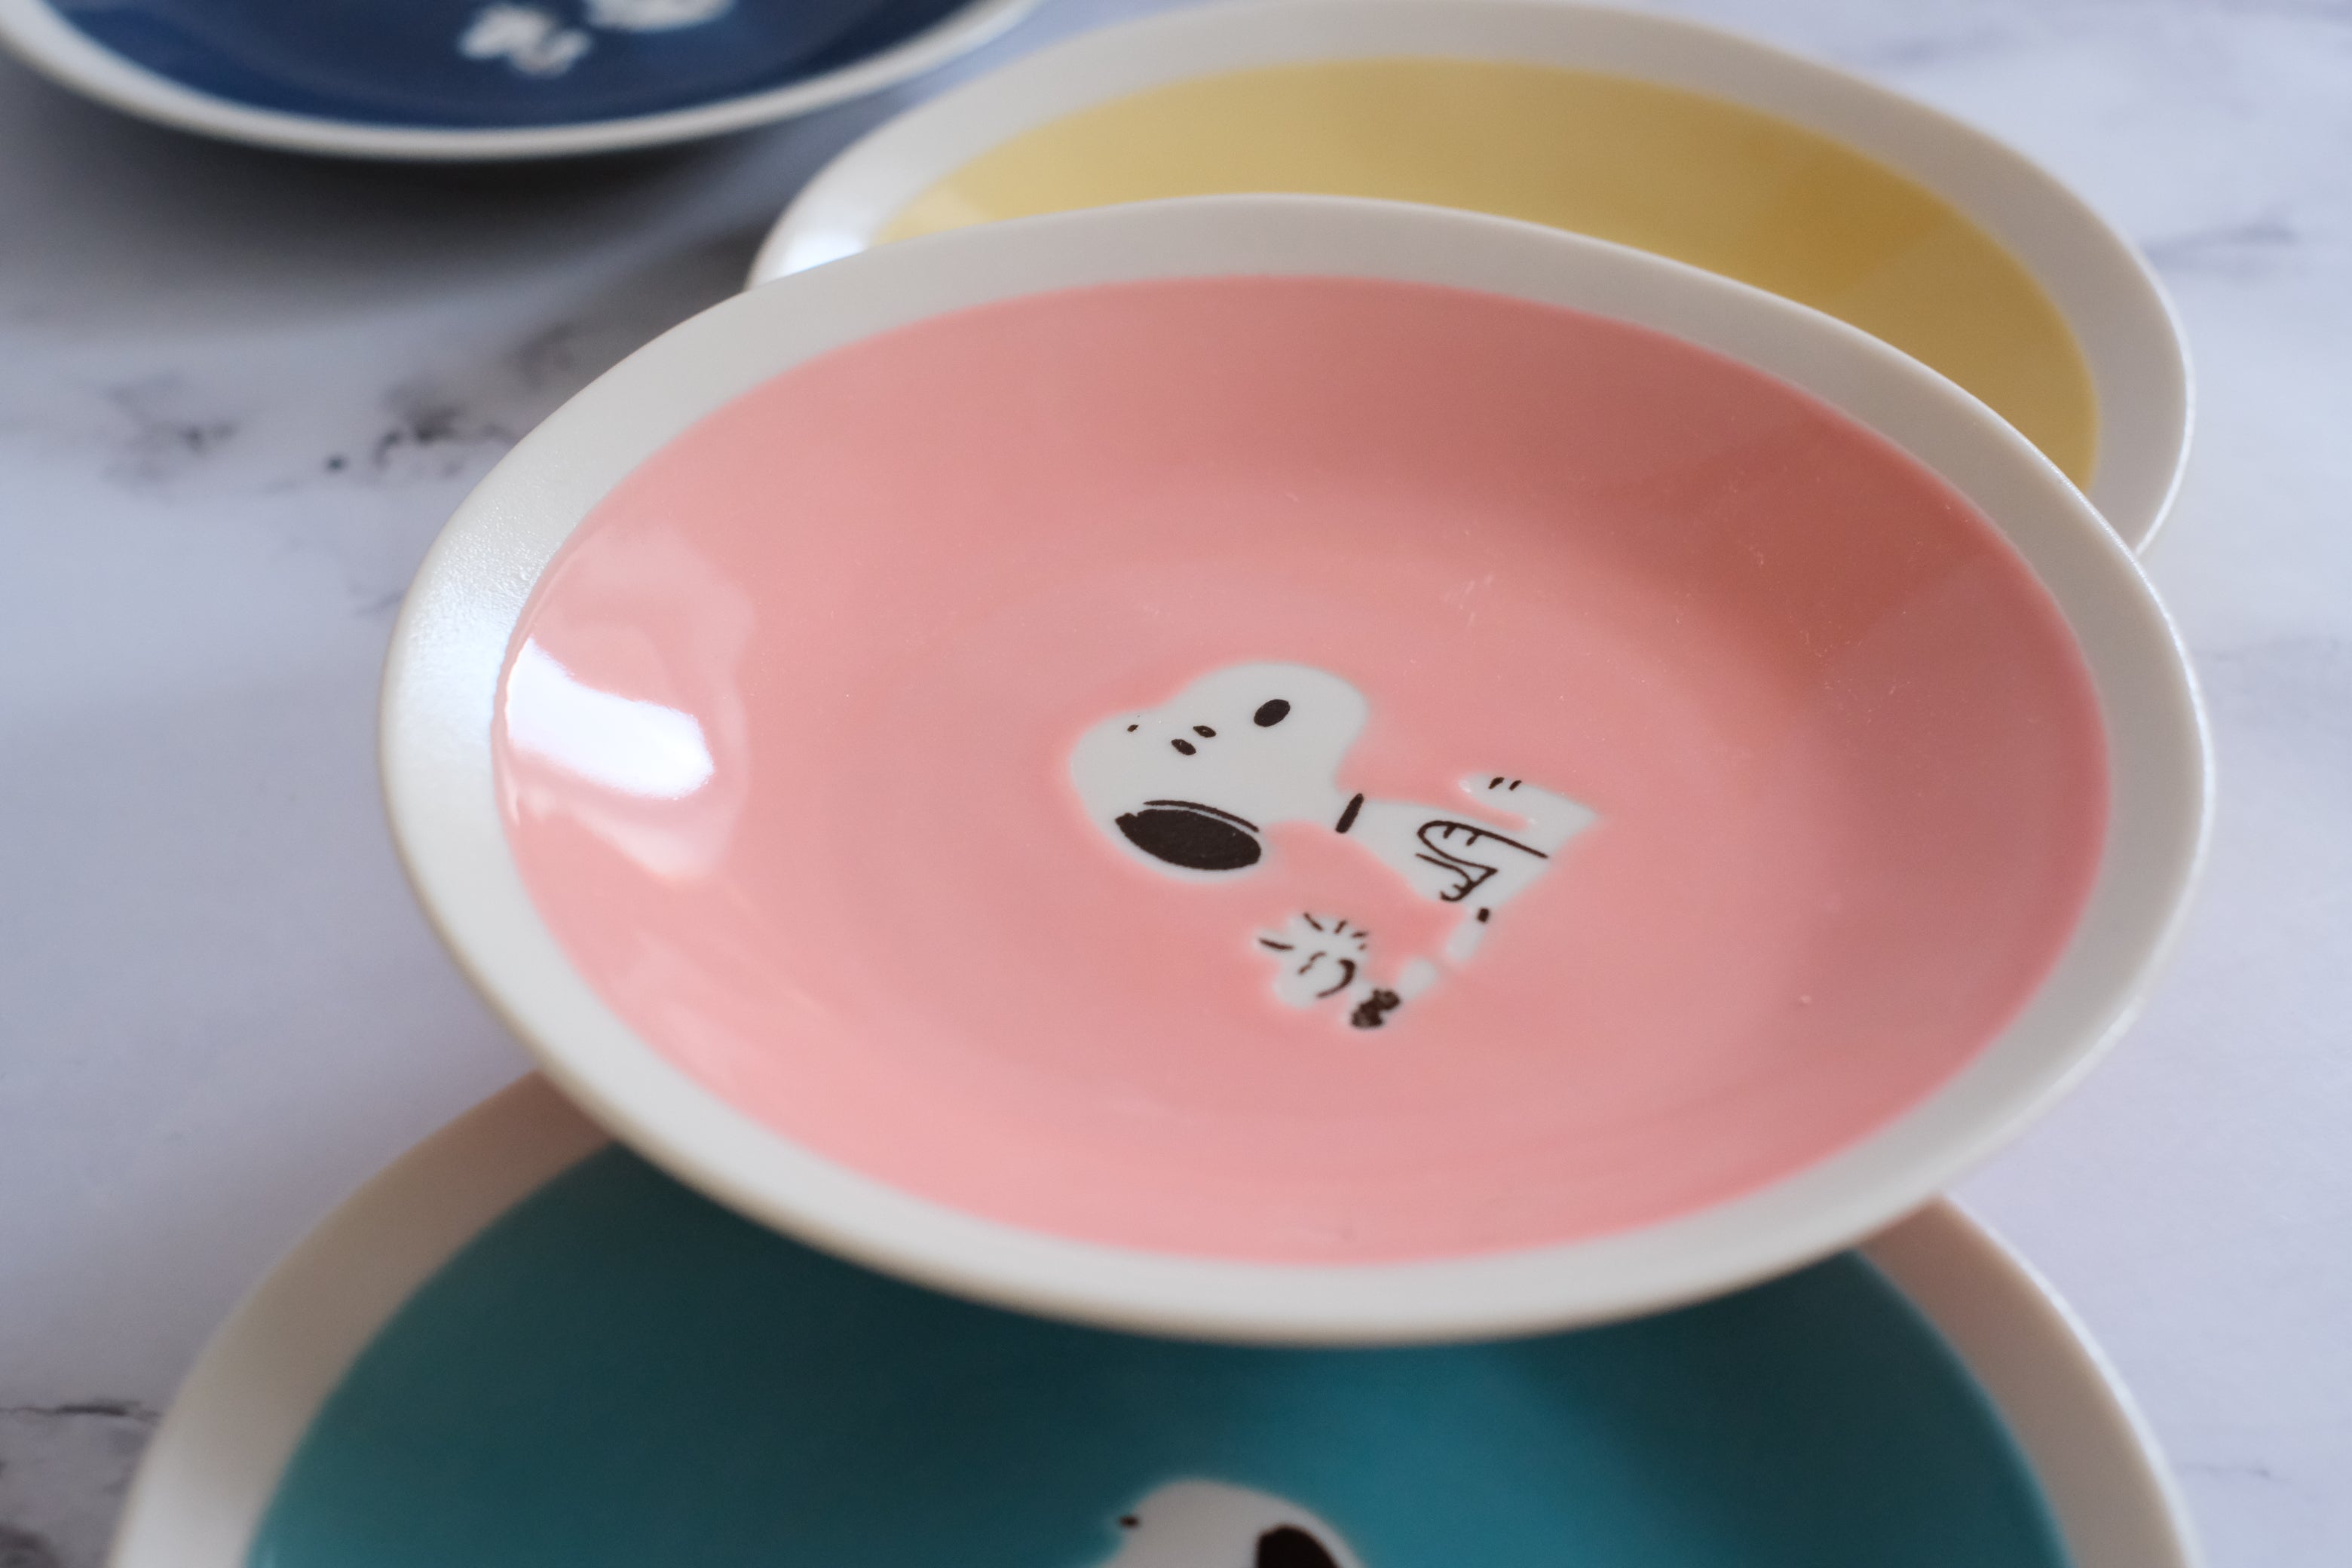 4 Piece Peanuts Japan Snoopy Colour Jelly Appetizer Plates